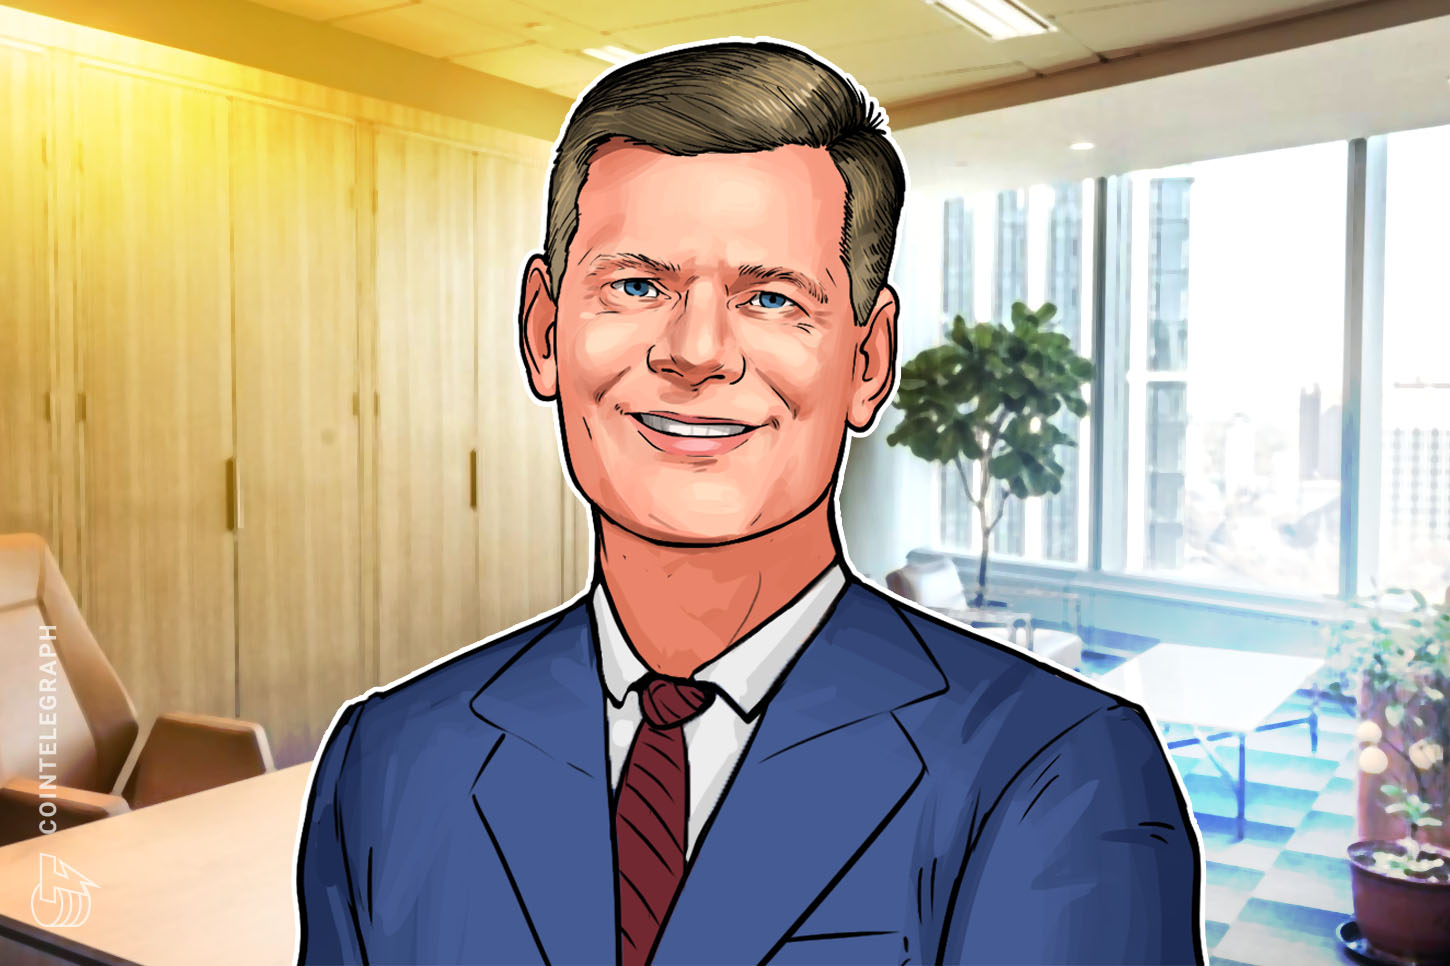 Bankless society ‘inevitable’ as a result of crypto, says Morgan Creek CEO